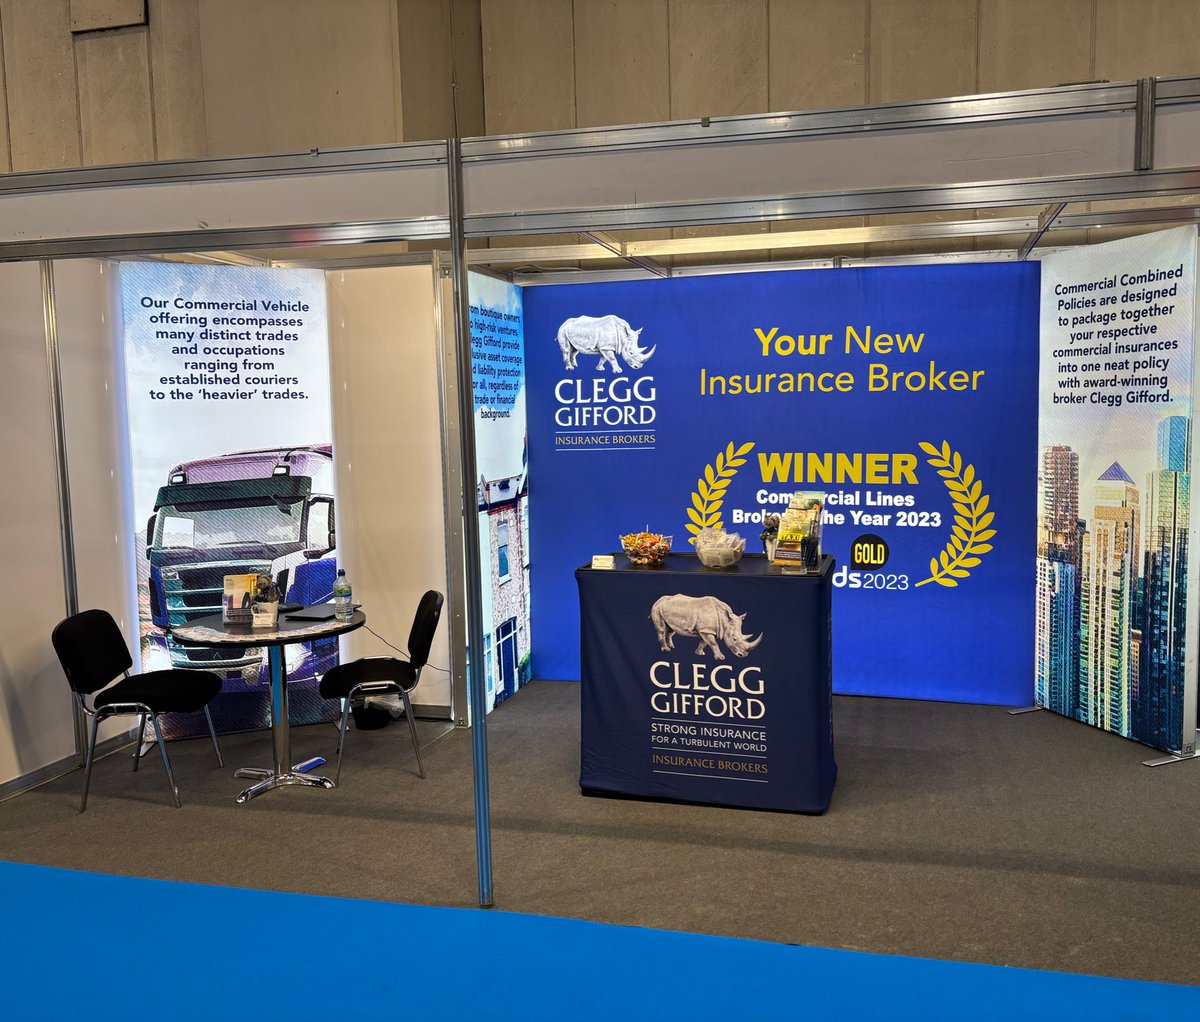 We are at the Commercial Vehicle Show Today.🥳

Come and talk to our experts at stand stand 5G61.🙋

If you miss us today, we will be at the NEC Birmingham until Thursday.⏰

See you soon!🙋‍♂️

#NECBirmingham #Birmingham #CommercialVehicleShow #NetworkingOpportunity